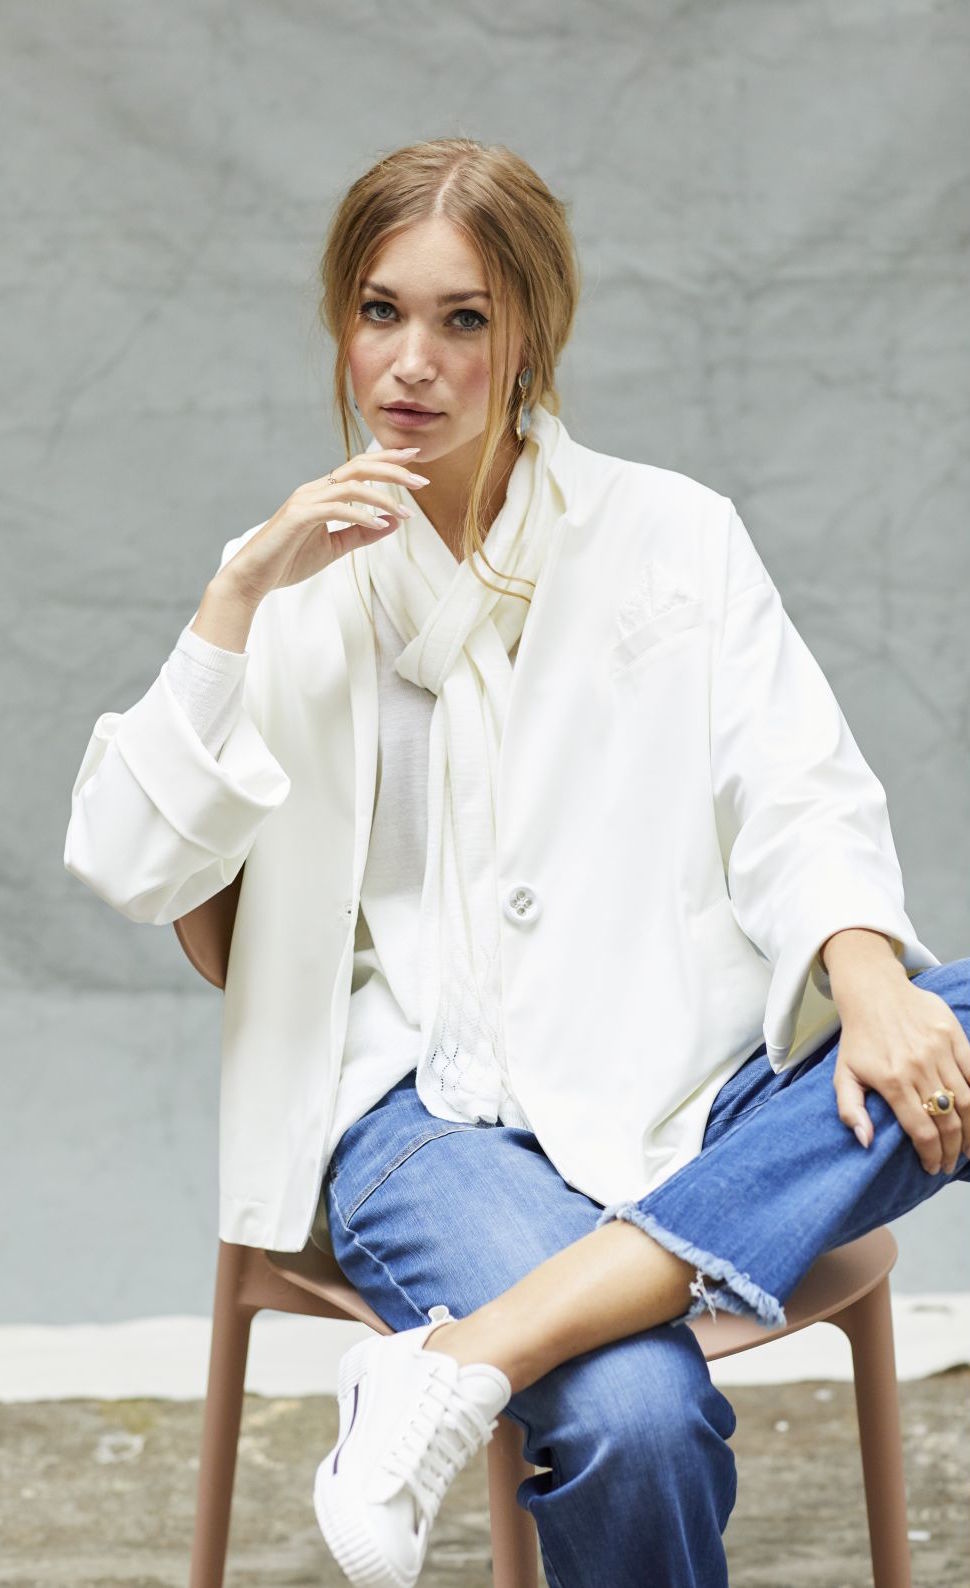 Front view of a woman sitting on a chair wearing blue jeans and the white indies voyageur jacket. This jacket is open and layered over a white top with a with scarf. The jacket has a single front button.